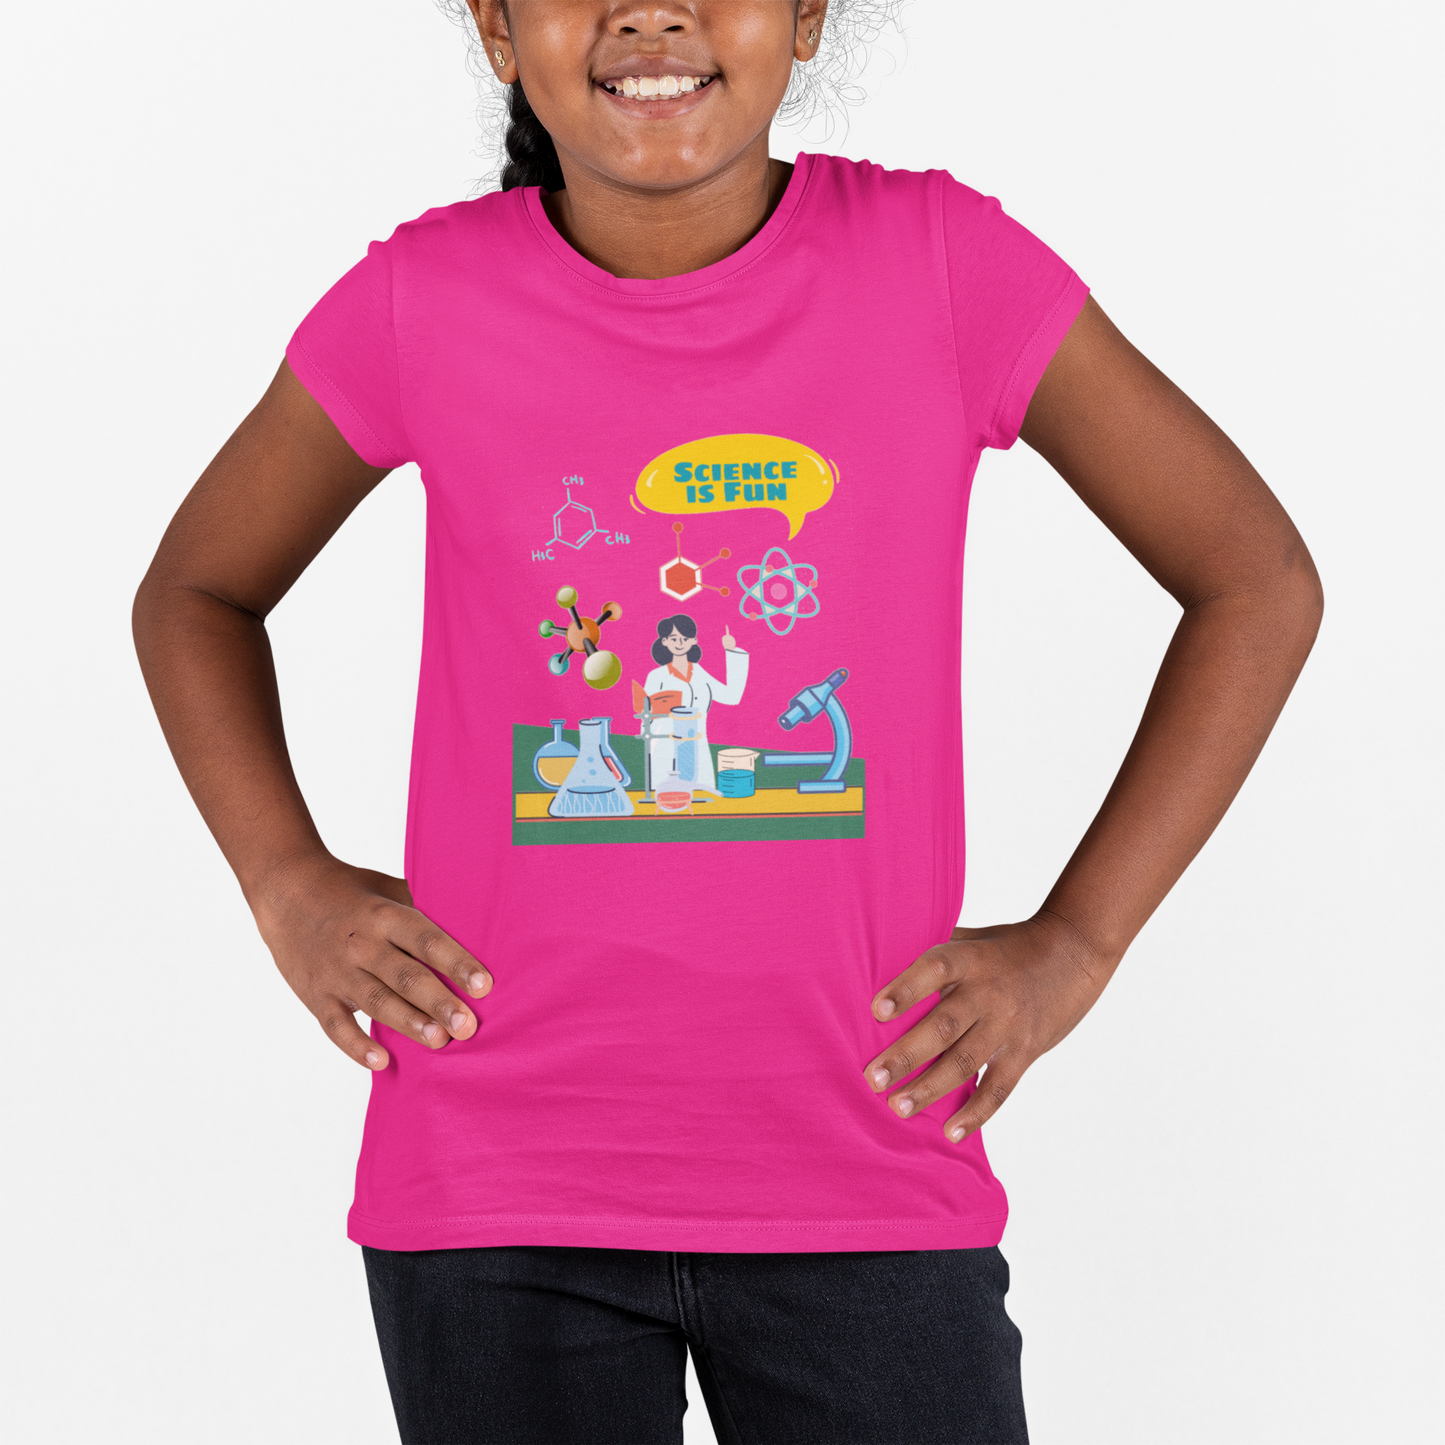 Science is Fun T-shirt for Girls Pink